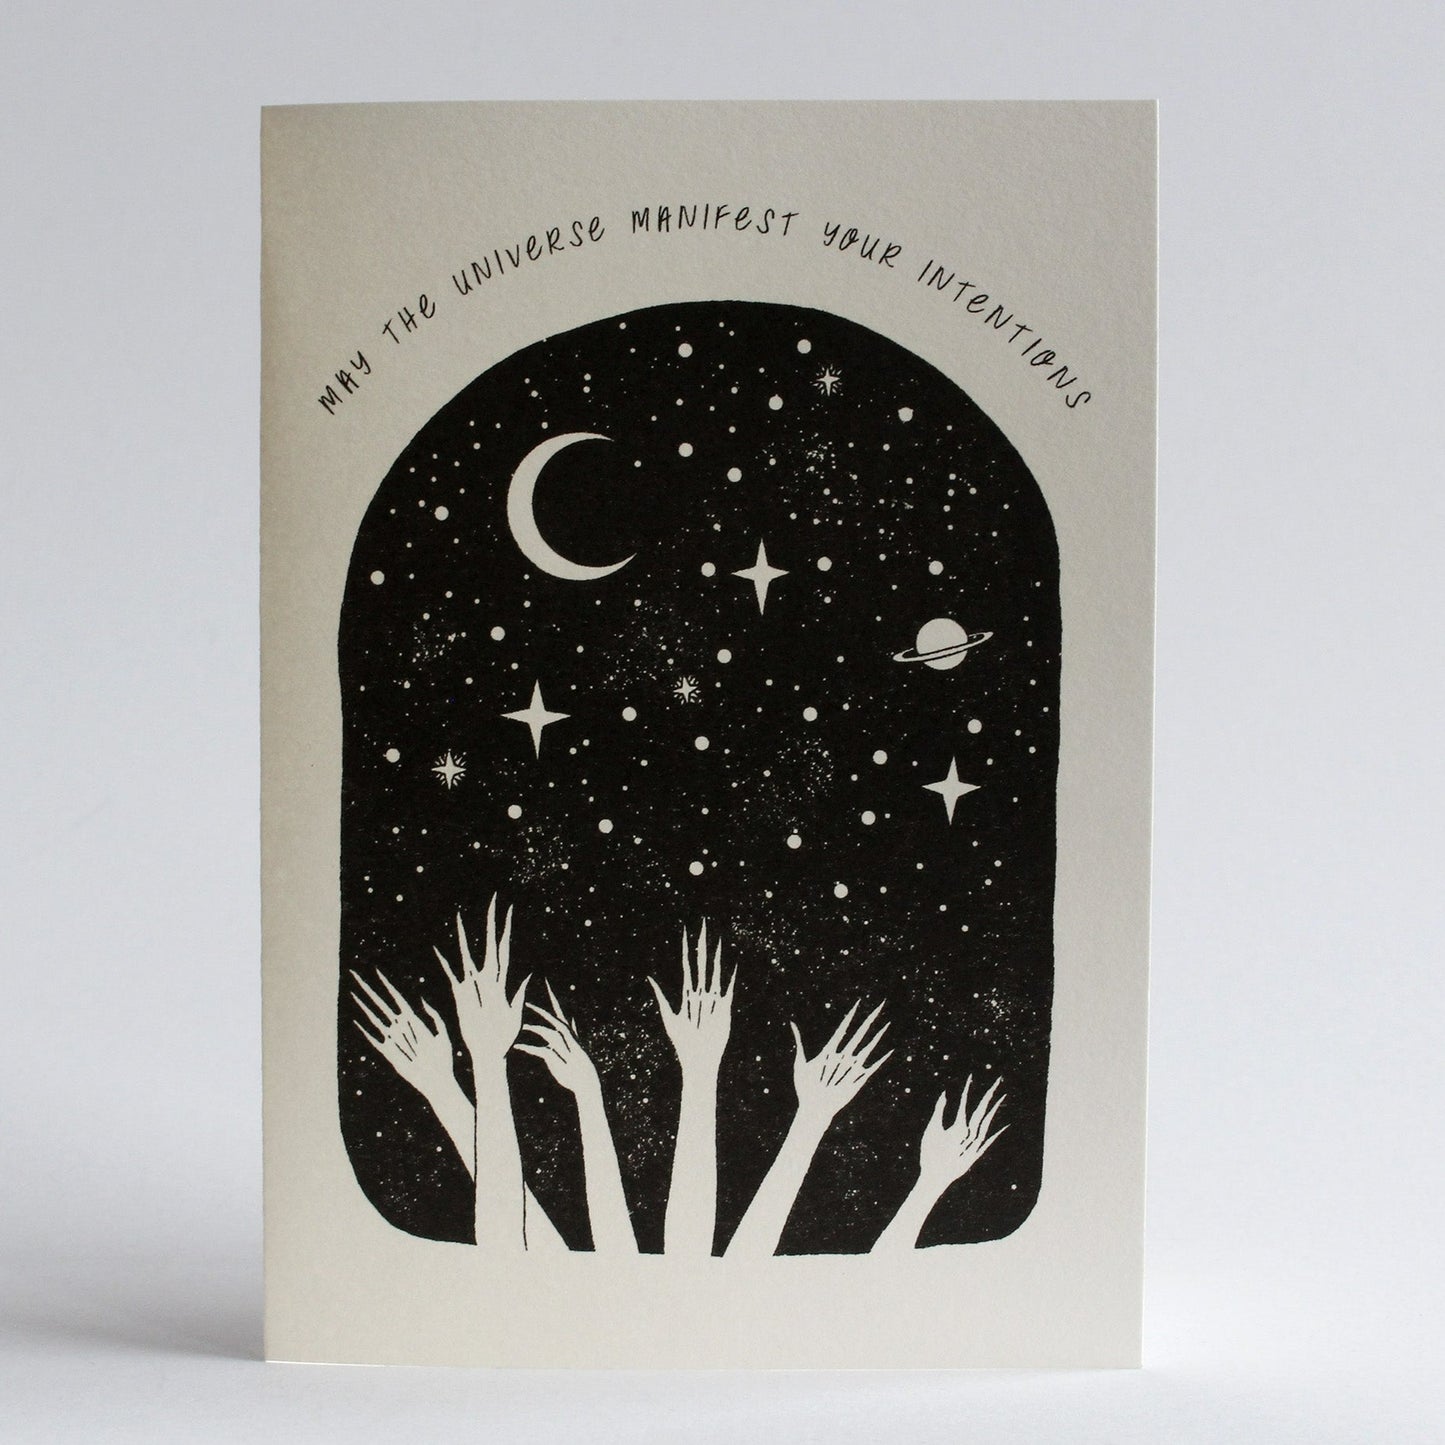 "MAY THE UNIVERSE MANIFEST YOUR INTENTIONS" GREETING CARD